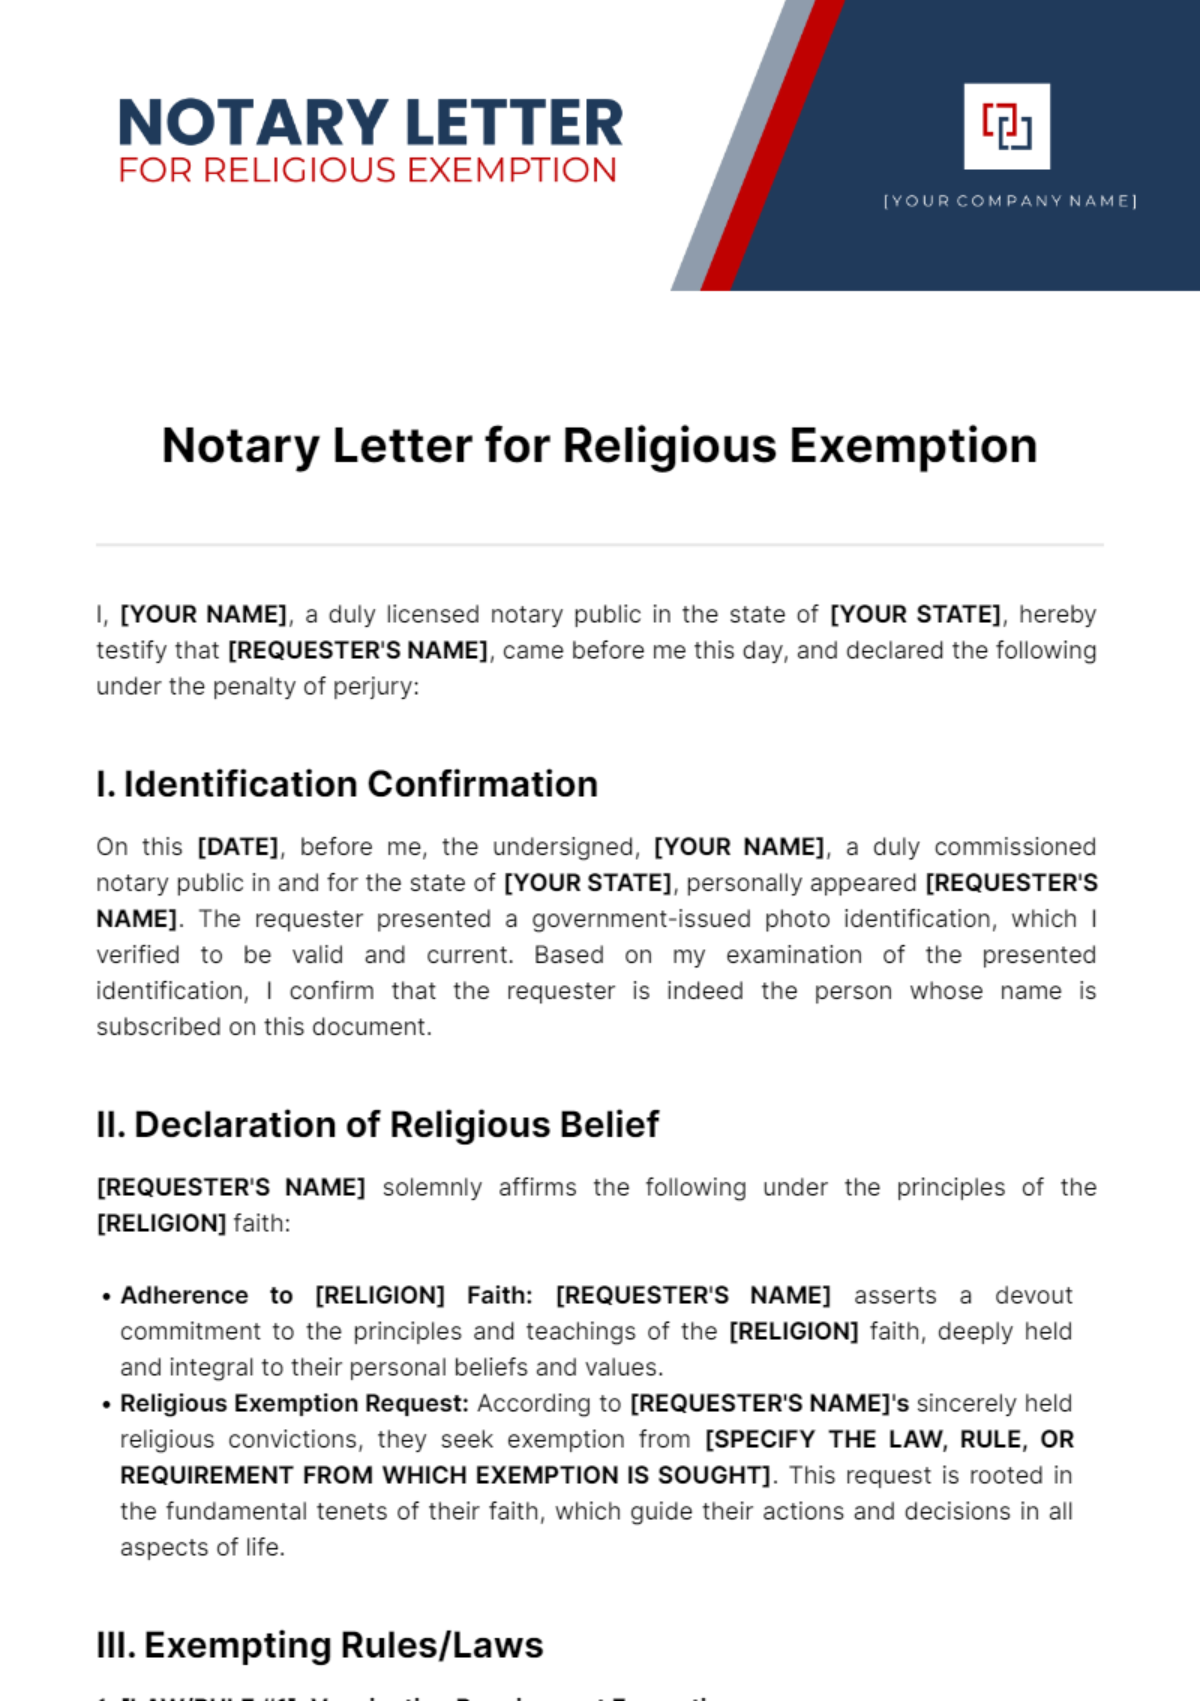 Notary Letter for Religious Exemption Template